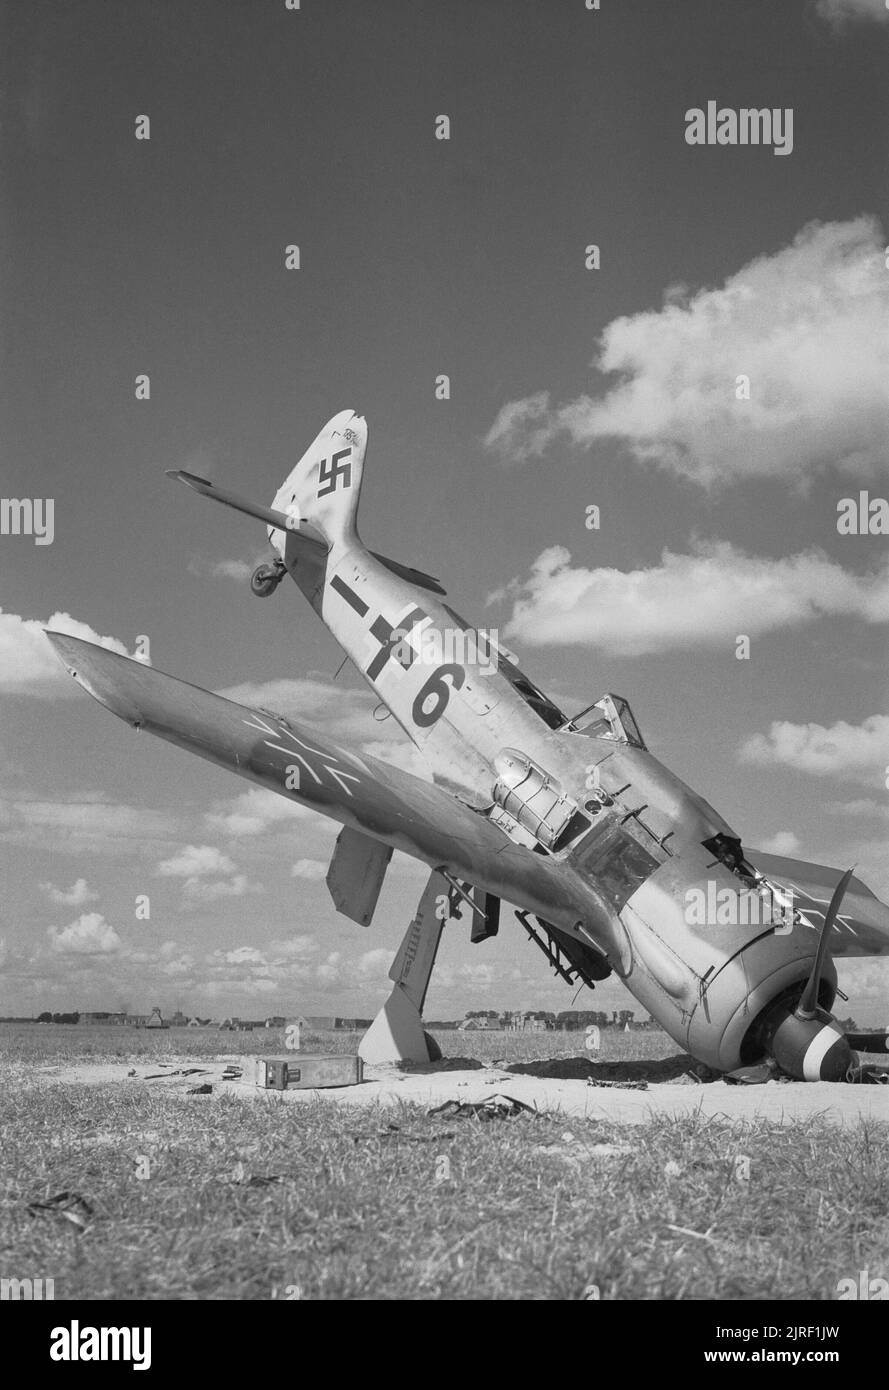 The German Retreat in Belgium, September 1944 A German Focke-Wulf FW 190A-8 fighter lies abandoned on an airfield liberated by British troops at Steen Okkerzeel, north east of Brussels, Belgium. Stock Photo